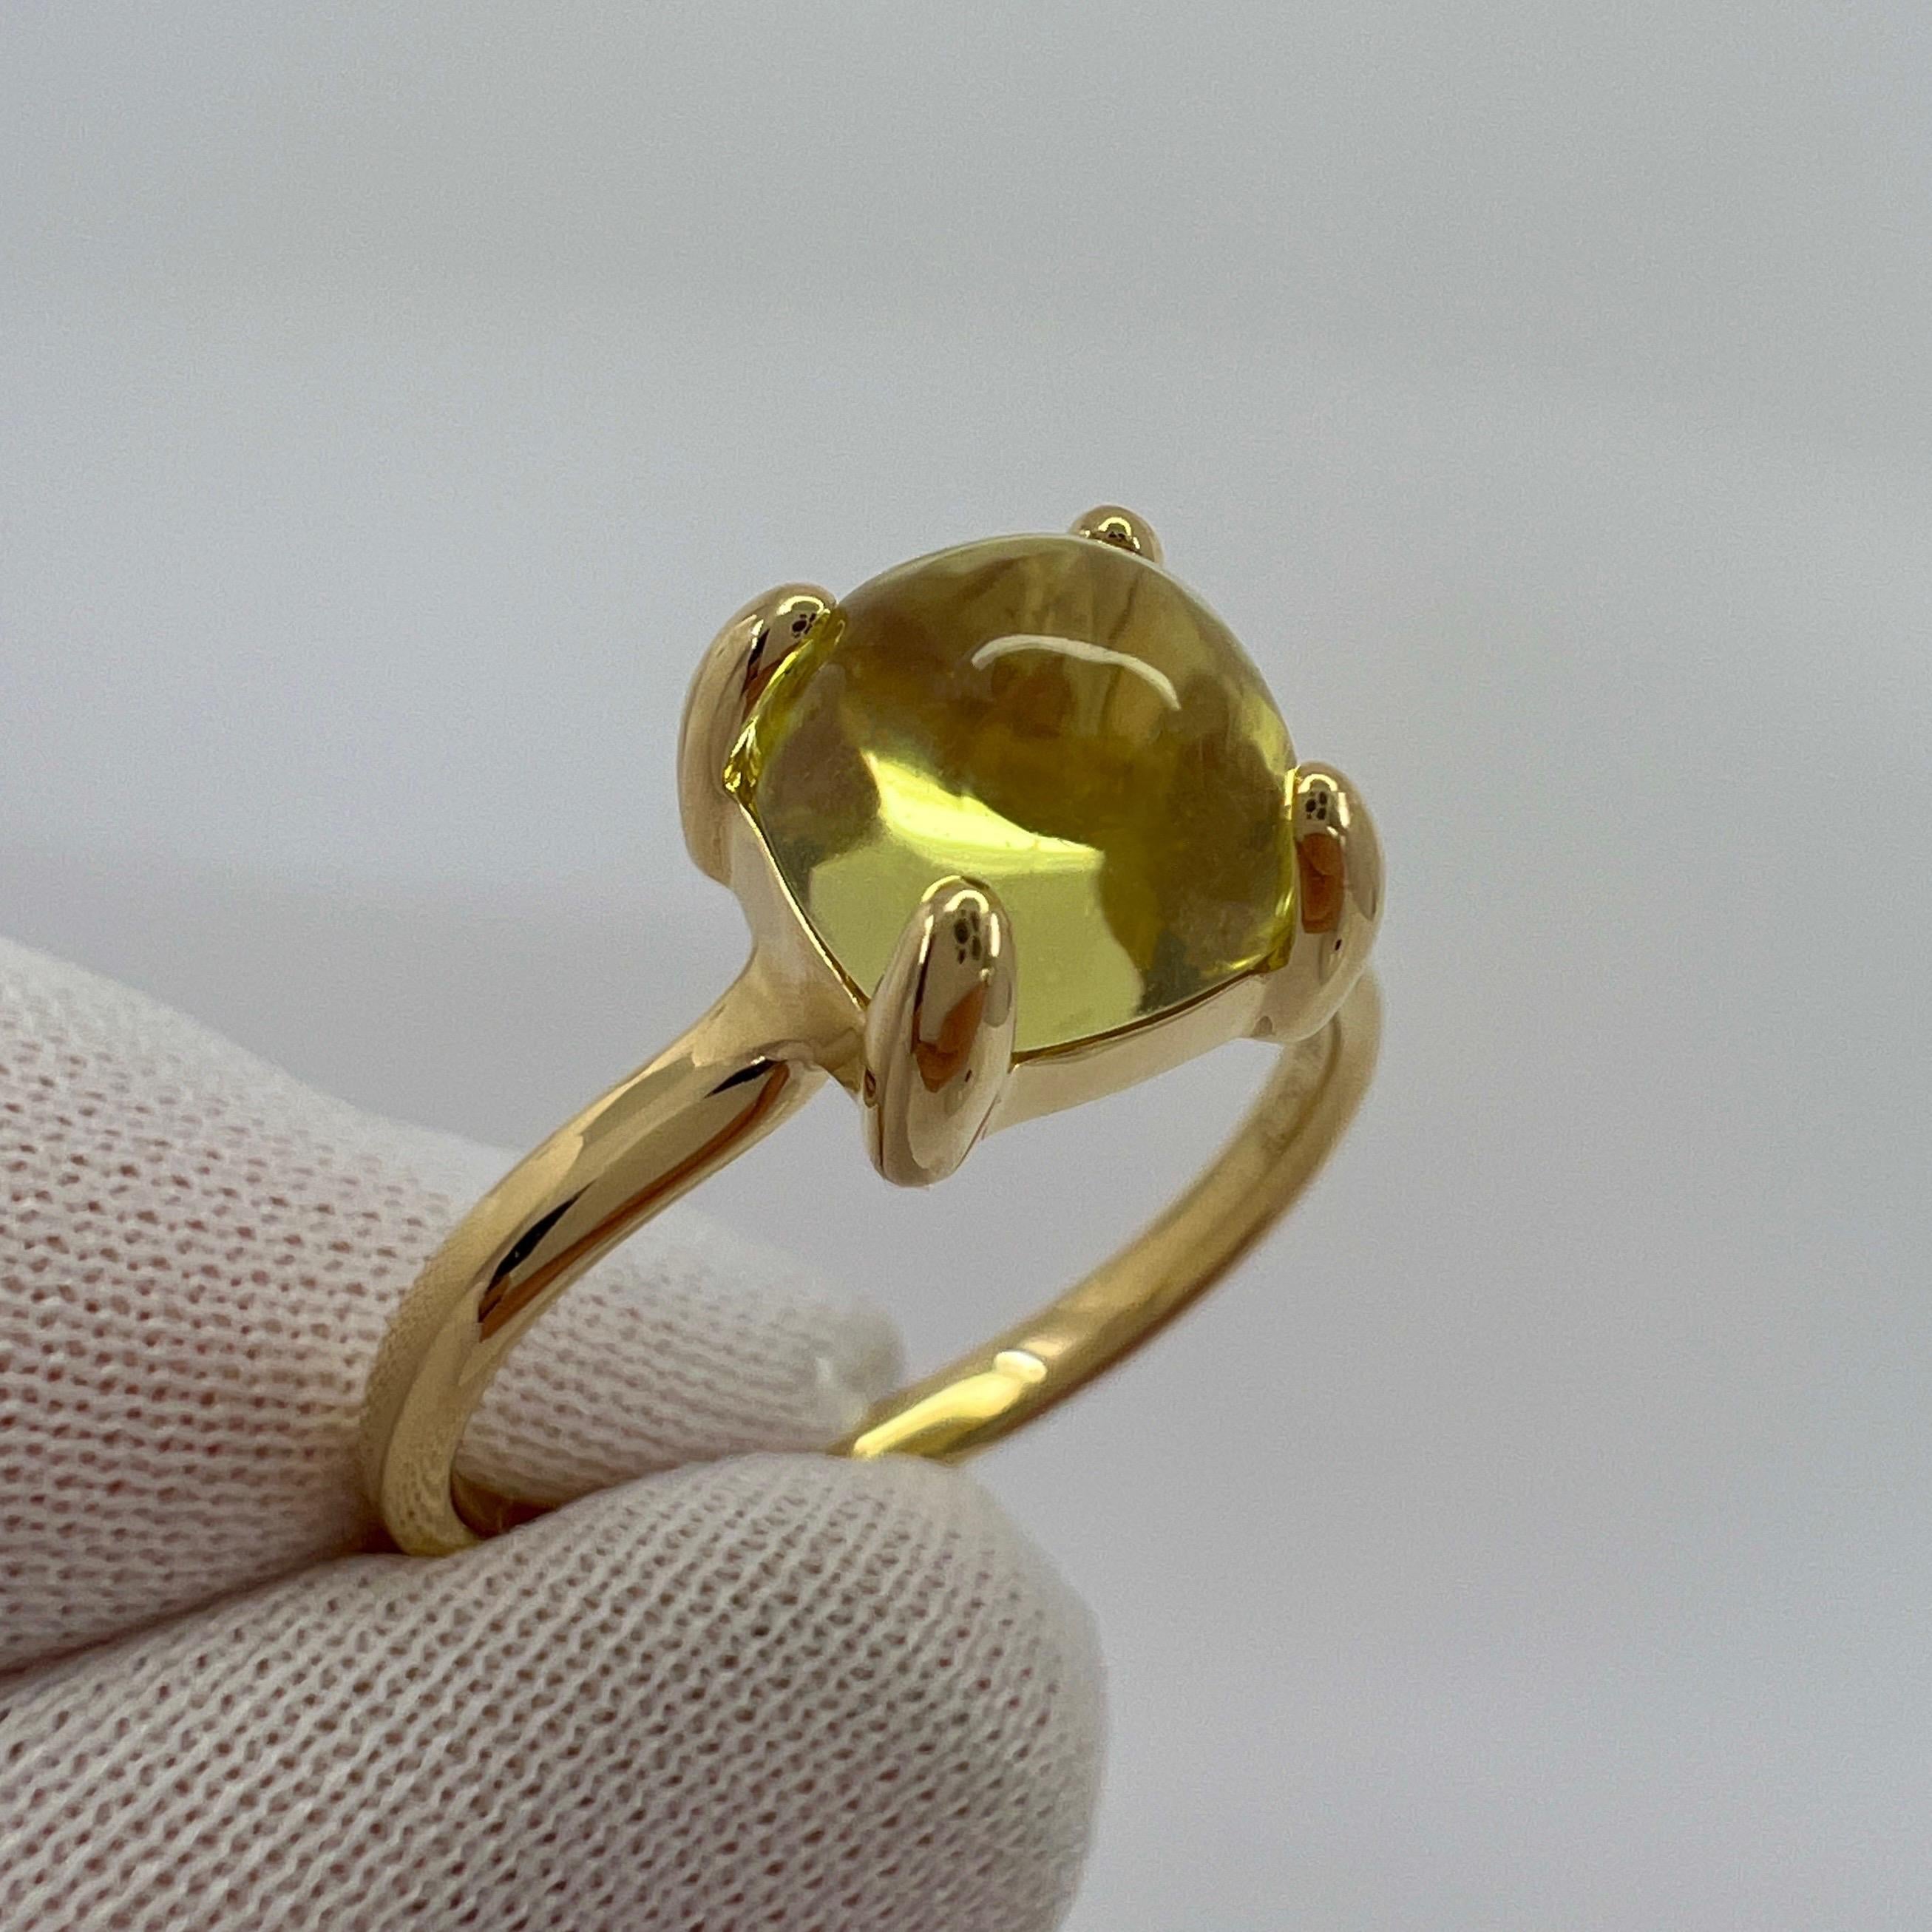 Rare Vintage Tiffany & Co. Paloma Picasso Yellow Citrine Sugar Stack 18k Yellow Gold Ring.

A beautiful and rare sugarloaf yellow citrine ring from the Tiffany & Co Paloma Picasso collection.

Fine jewellery houses like Tiffany only use the finest